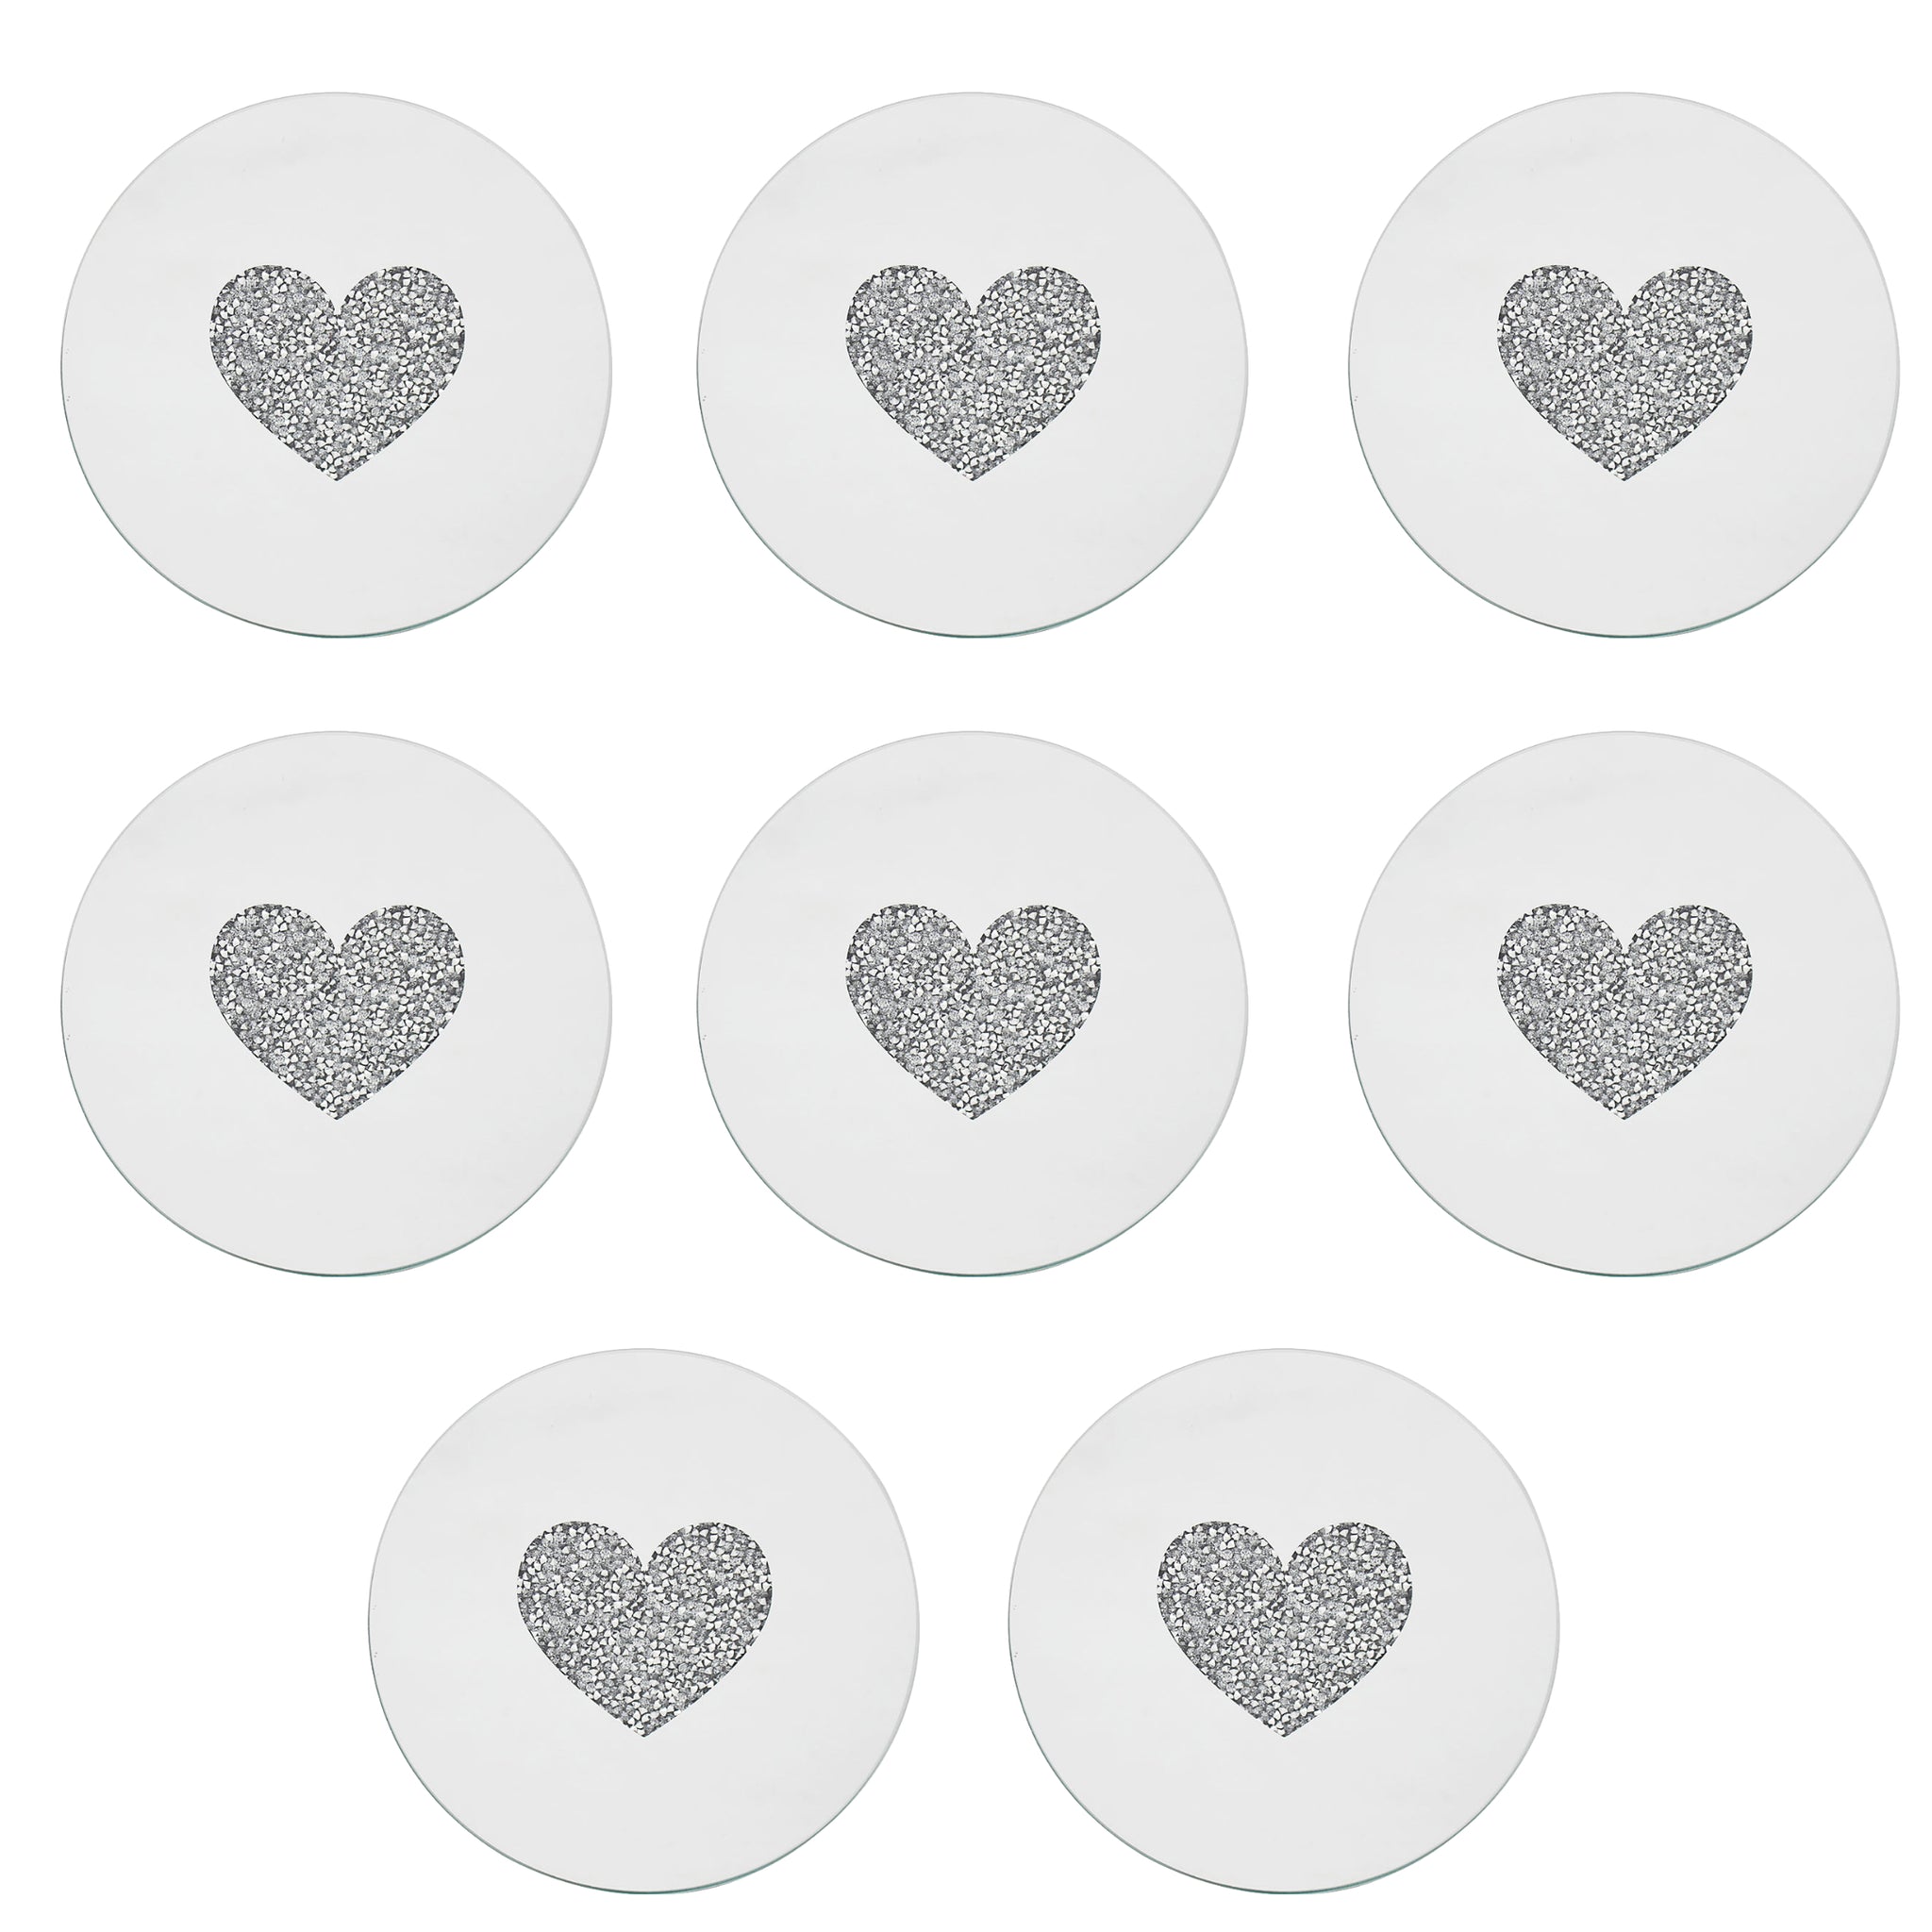 Set of 8 15cm Mirrored Round Candle Plate - Multi Crystal Heart Diamante